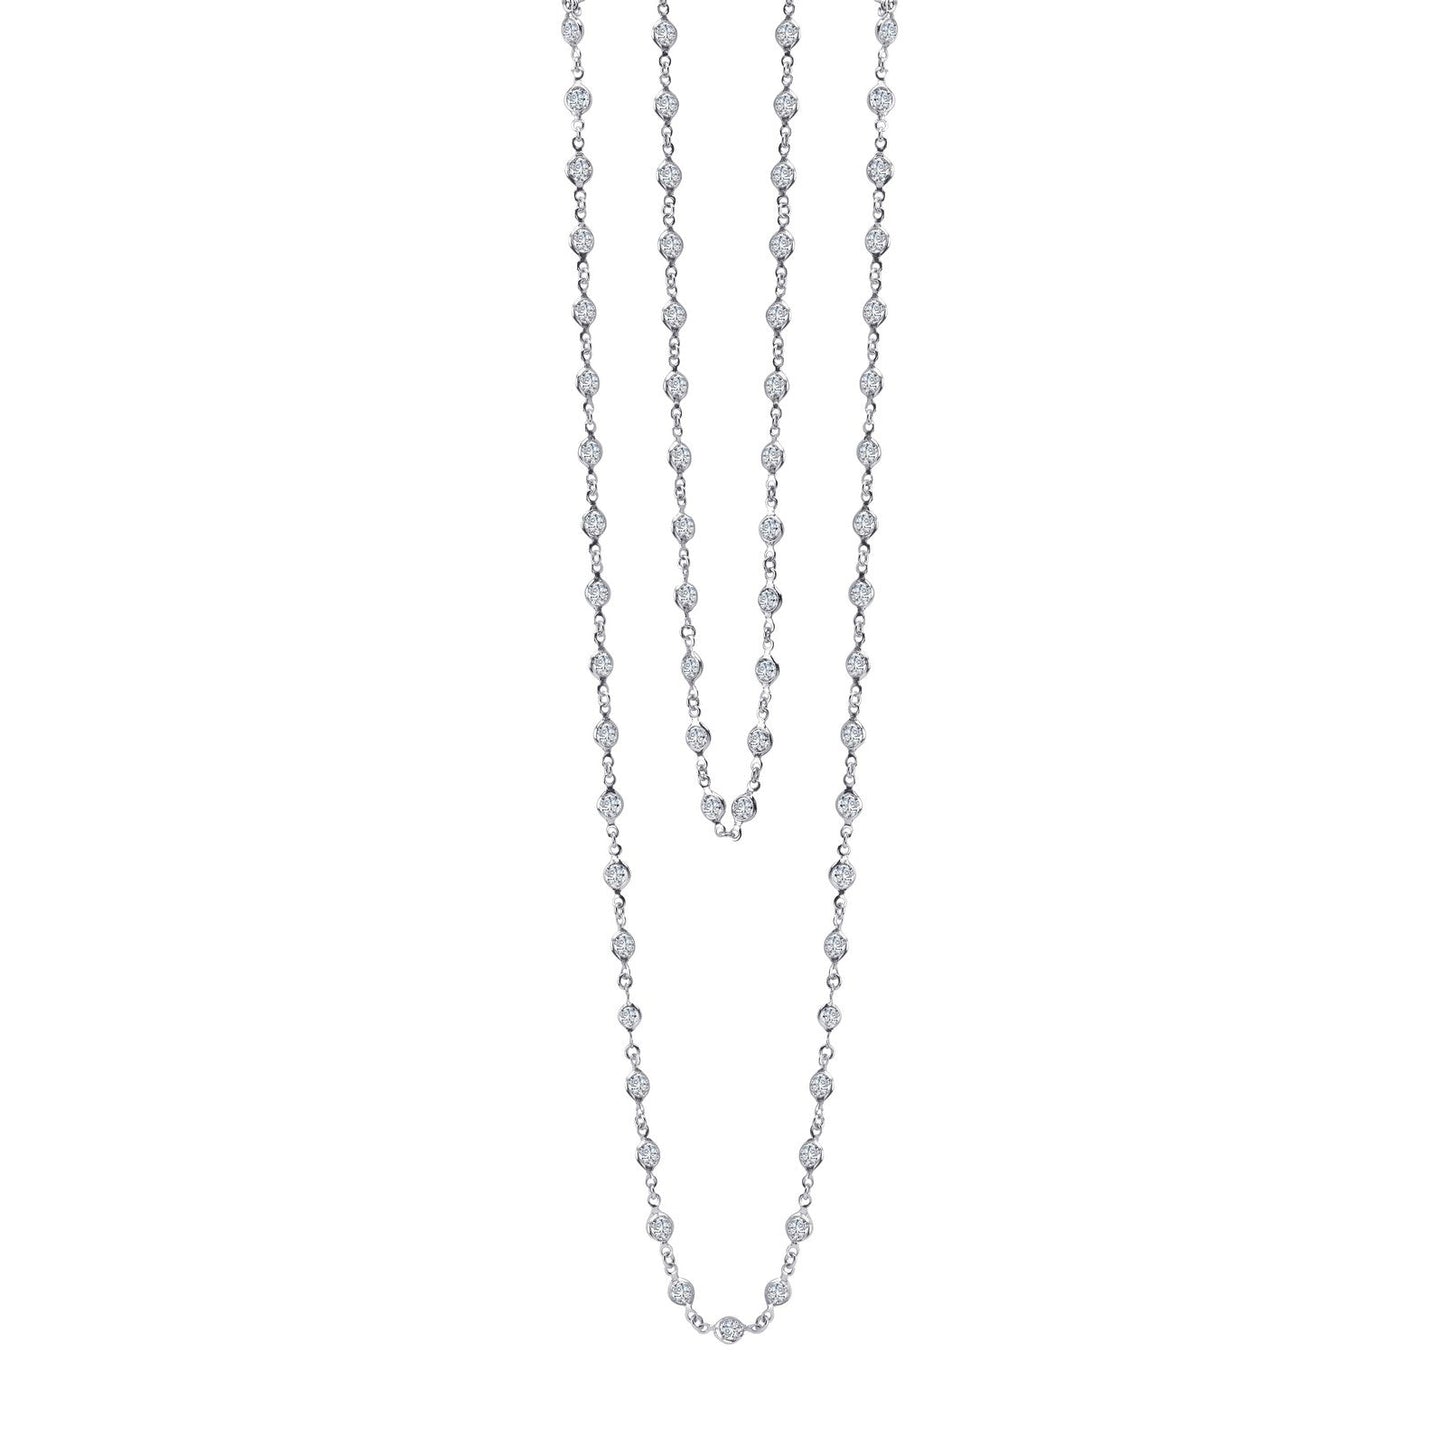 Lafonn Classic Station Necklace 35 Stone Count N0009CLP16